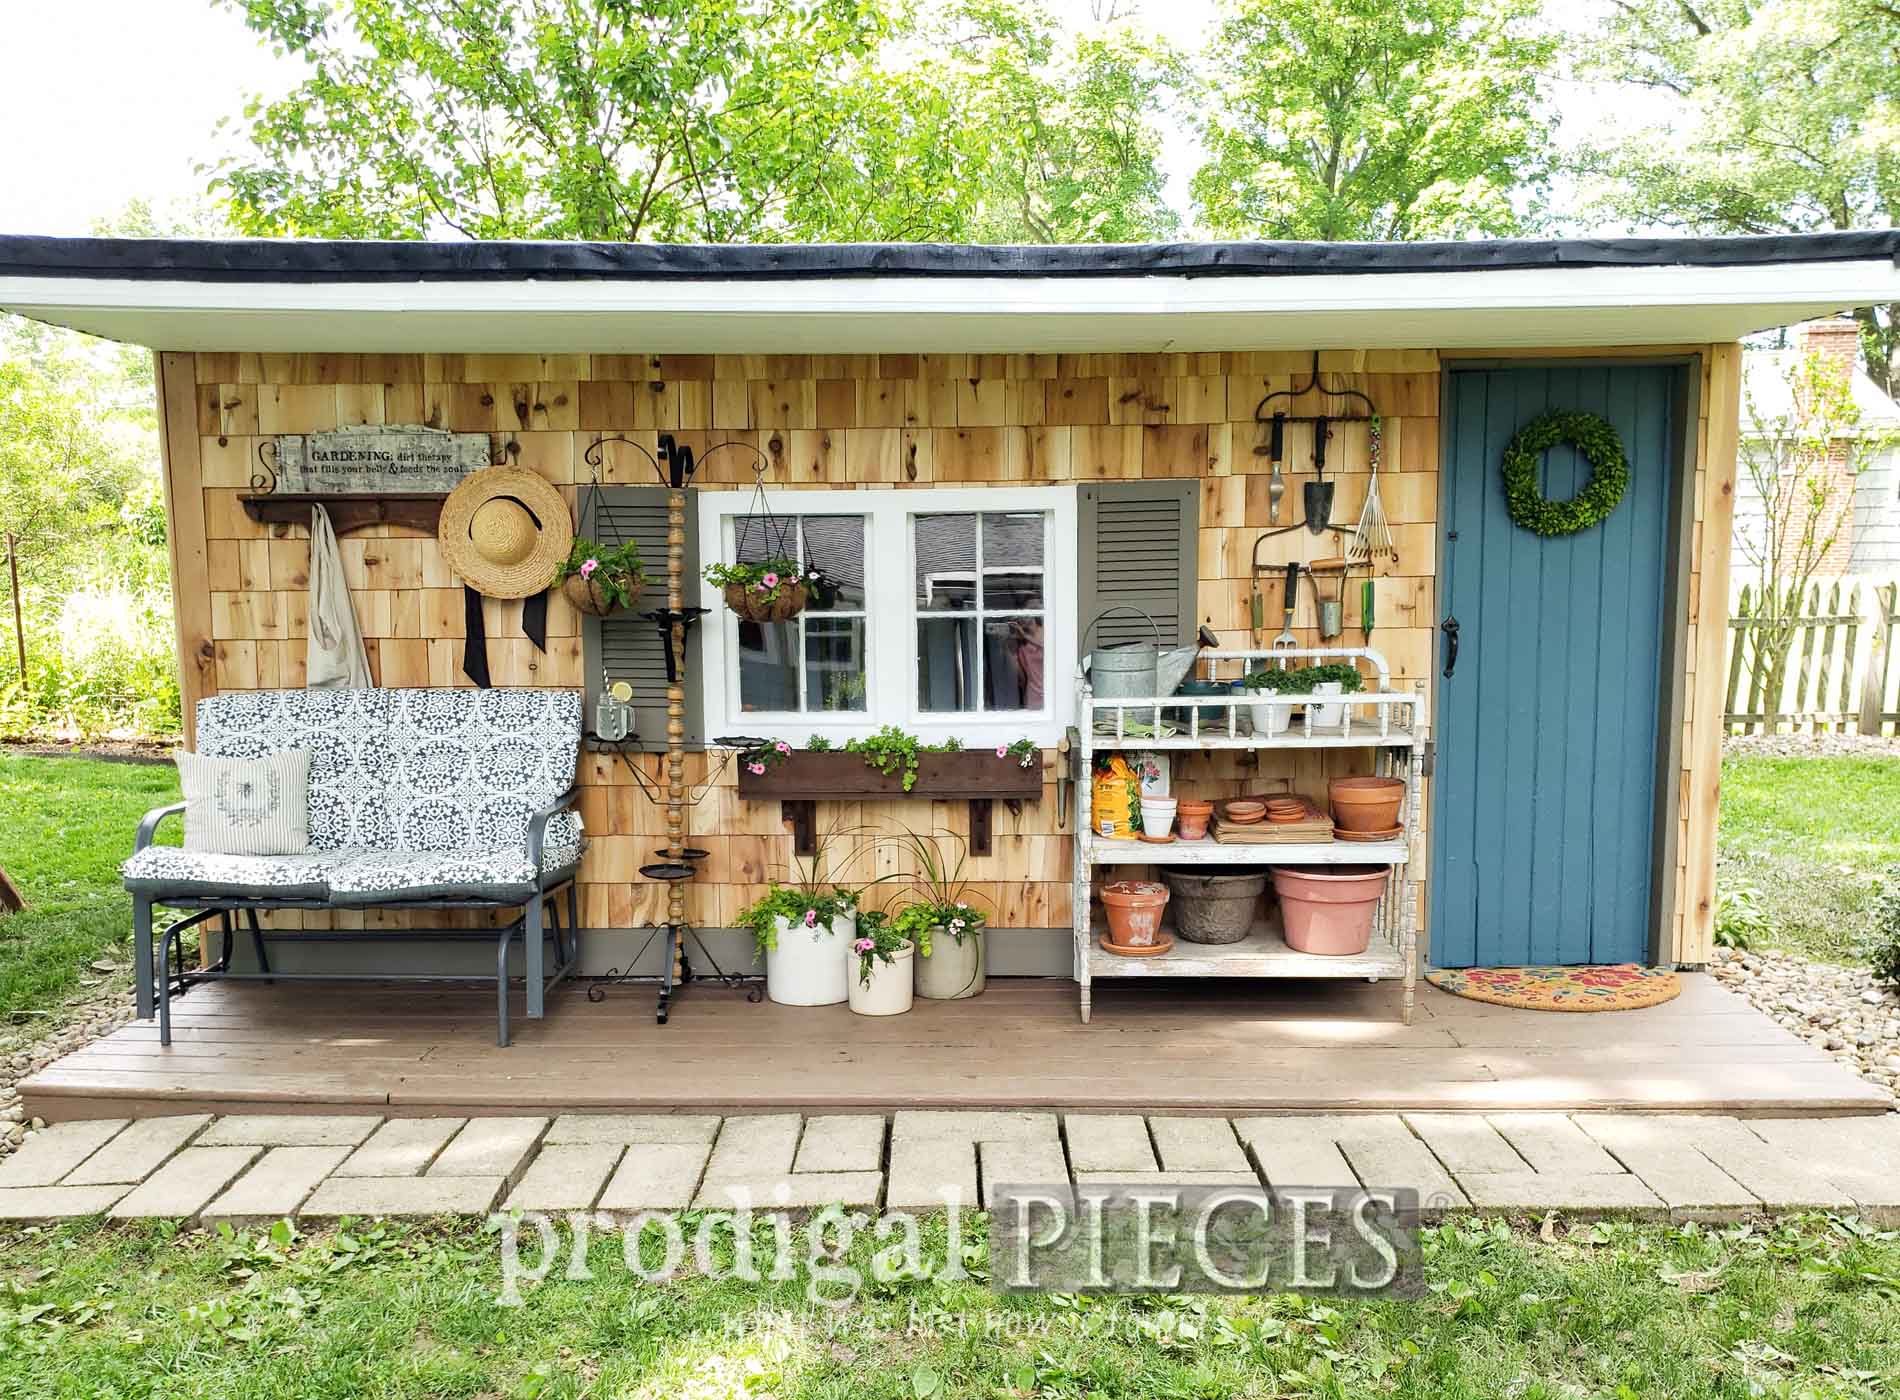 Featured Garden Shed Remodel by Larissa of Prodigal Pieces | prodigalpieces.com #prodigalpieces #diy #garden #home #homedecor #farmhouse